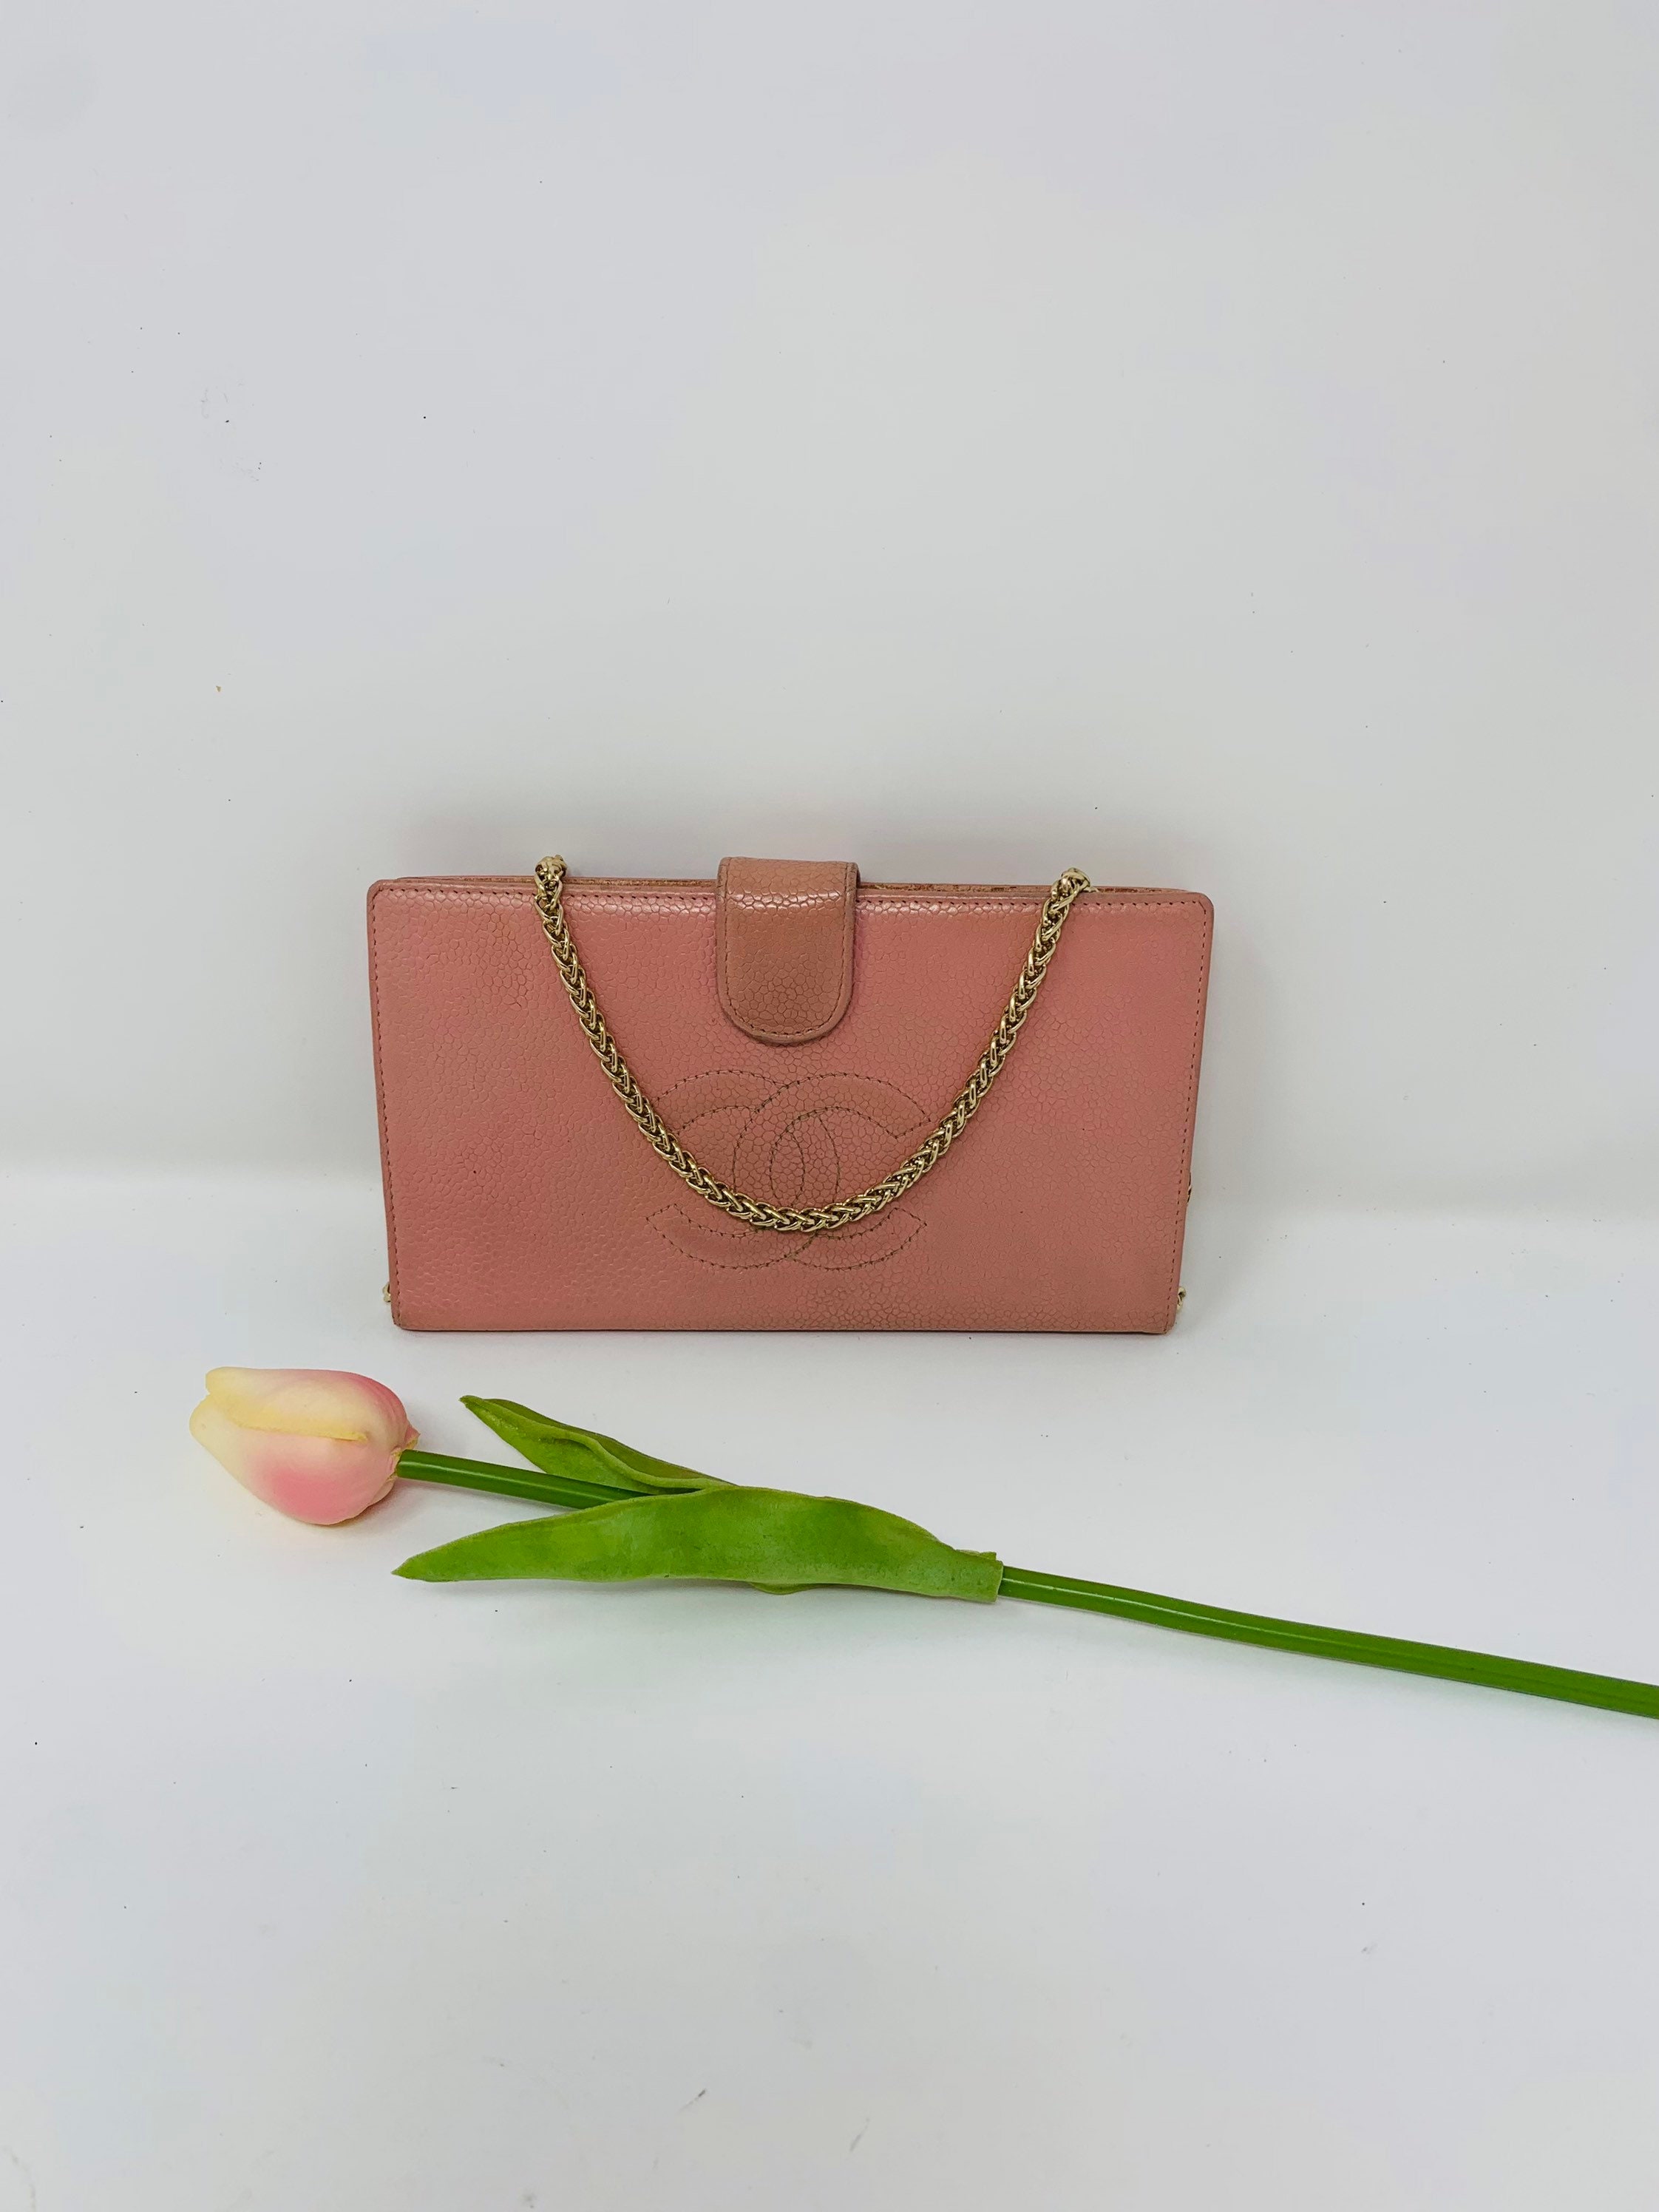 Buy [Used] CHANEL coin case coin purse wallet matelasse coco mark lambskin  leather pink from Japan - Buy authentic Plus exclusive items from Japan